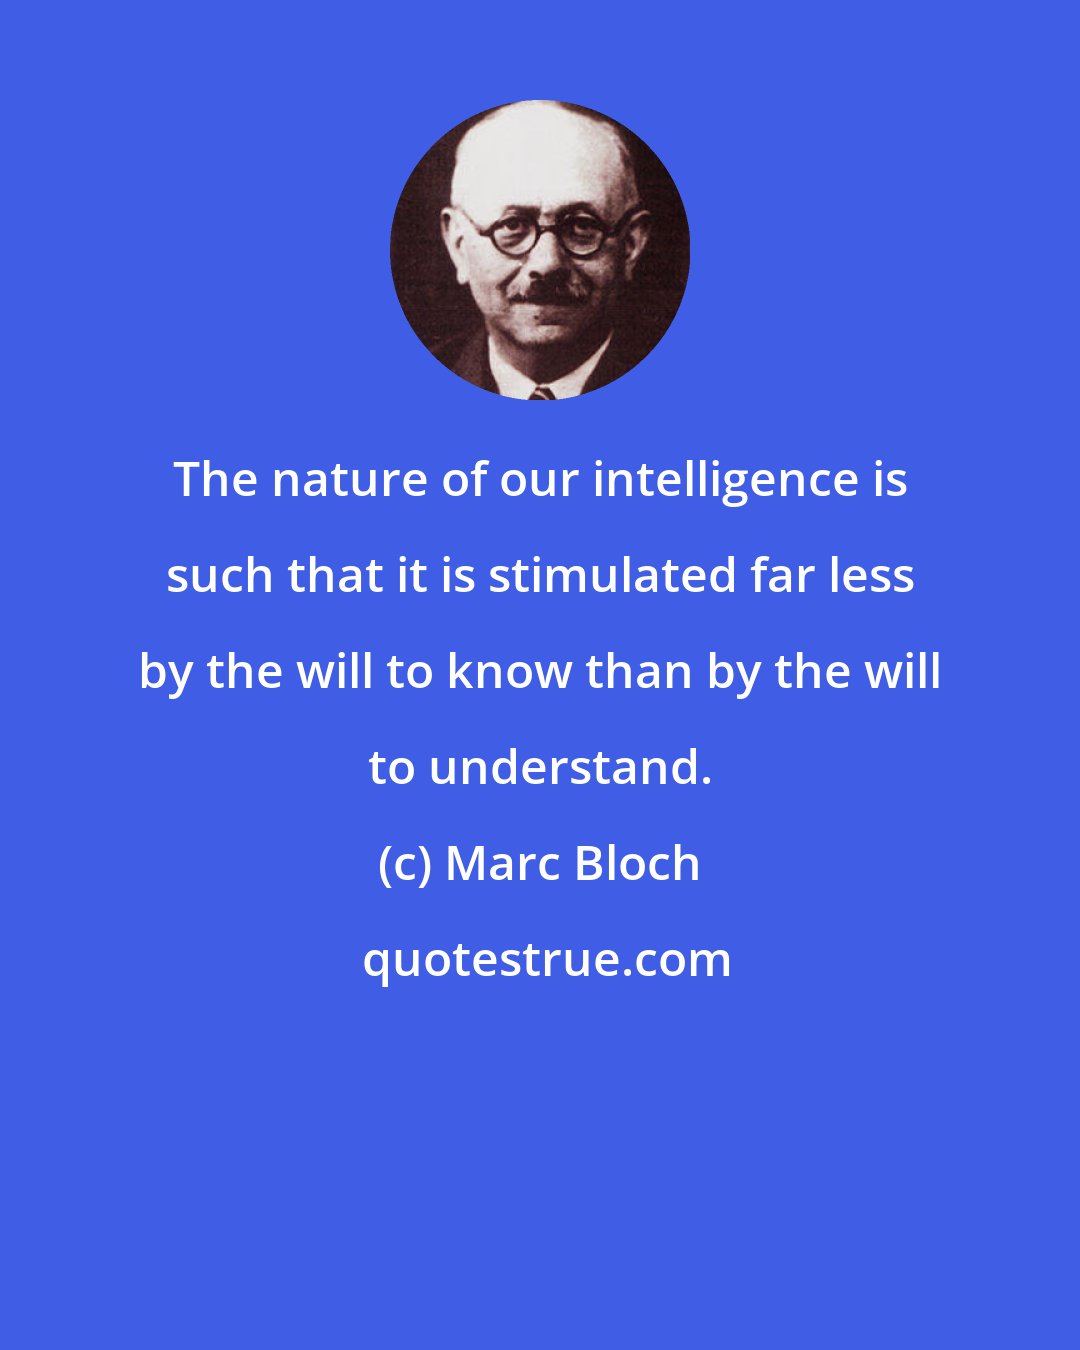 Marc Bloch: The nature of our intelligence is such that it is stimulated far less by the will to know than by the will to understand.